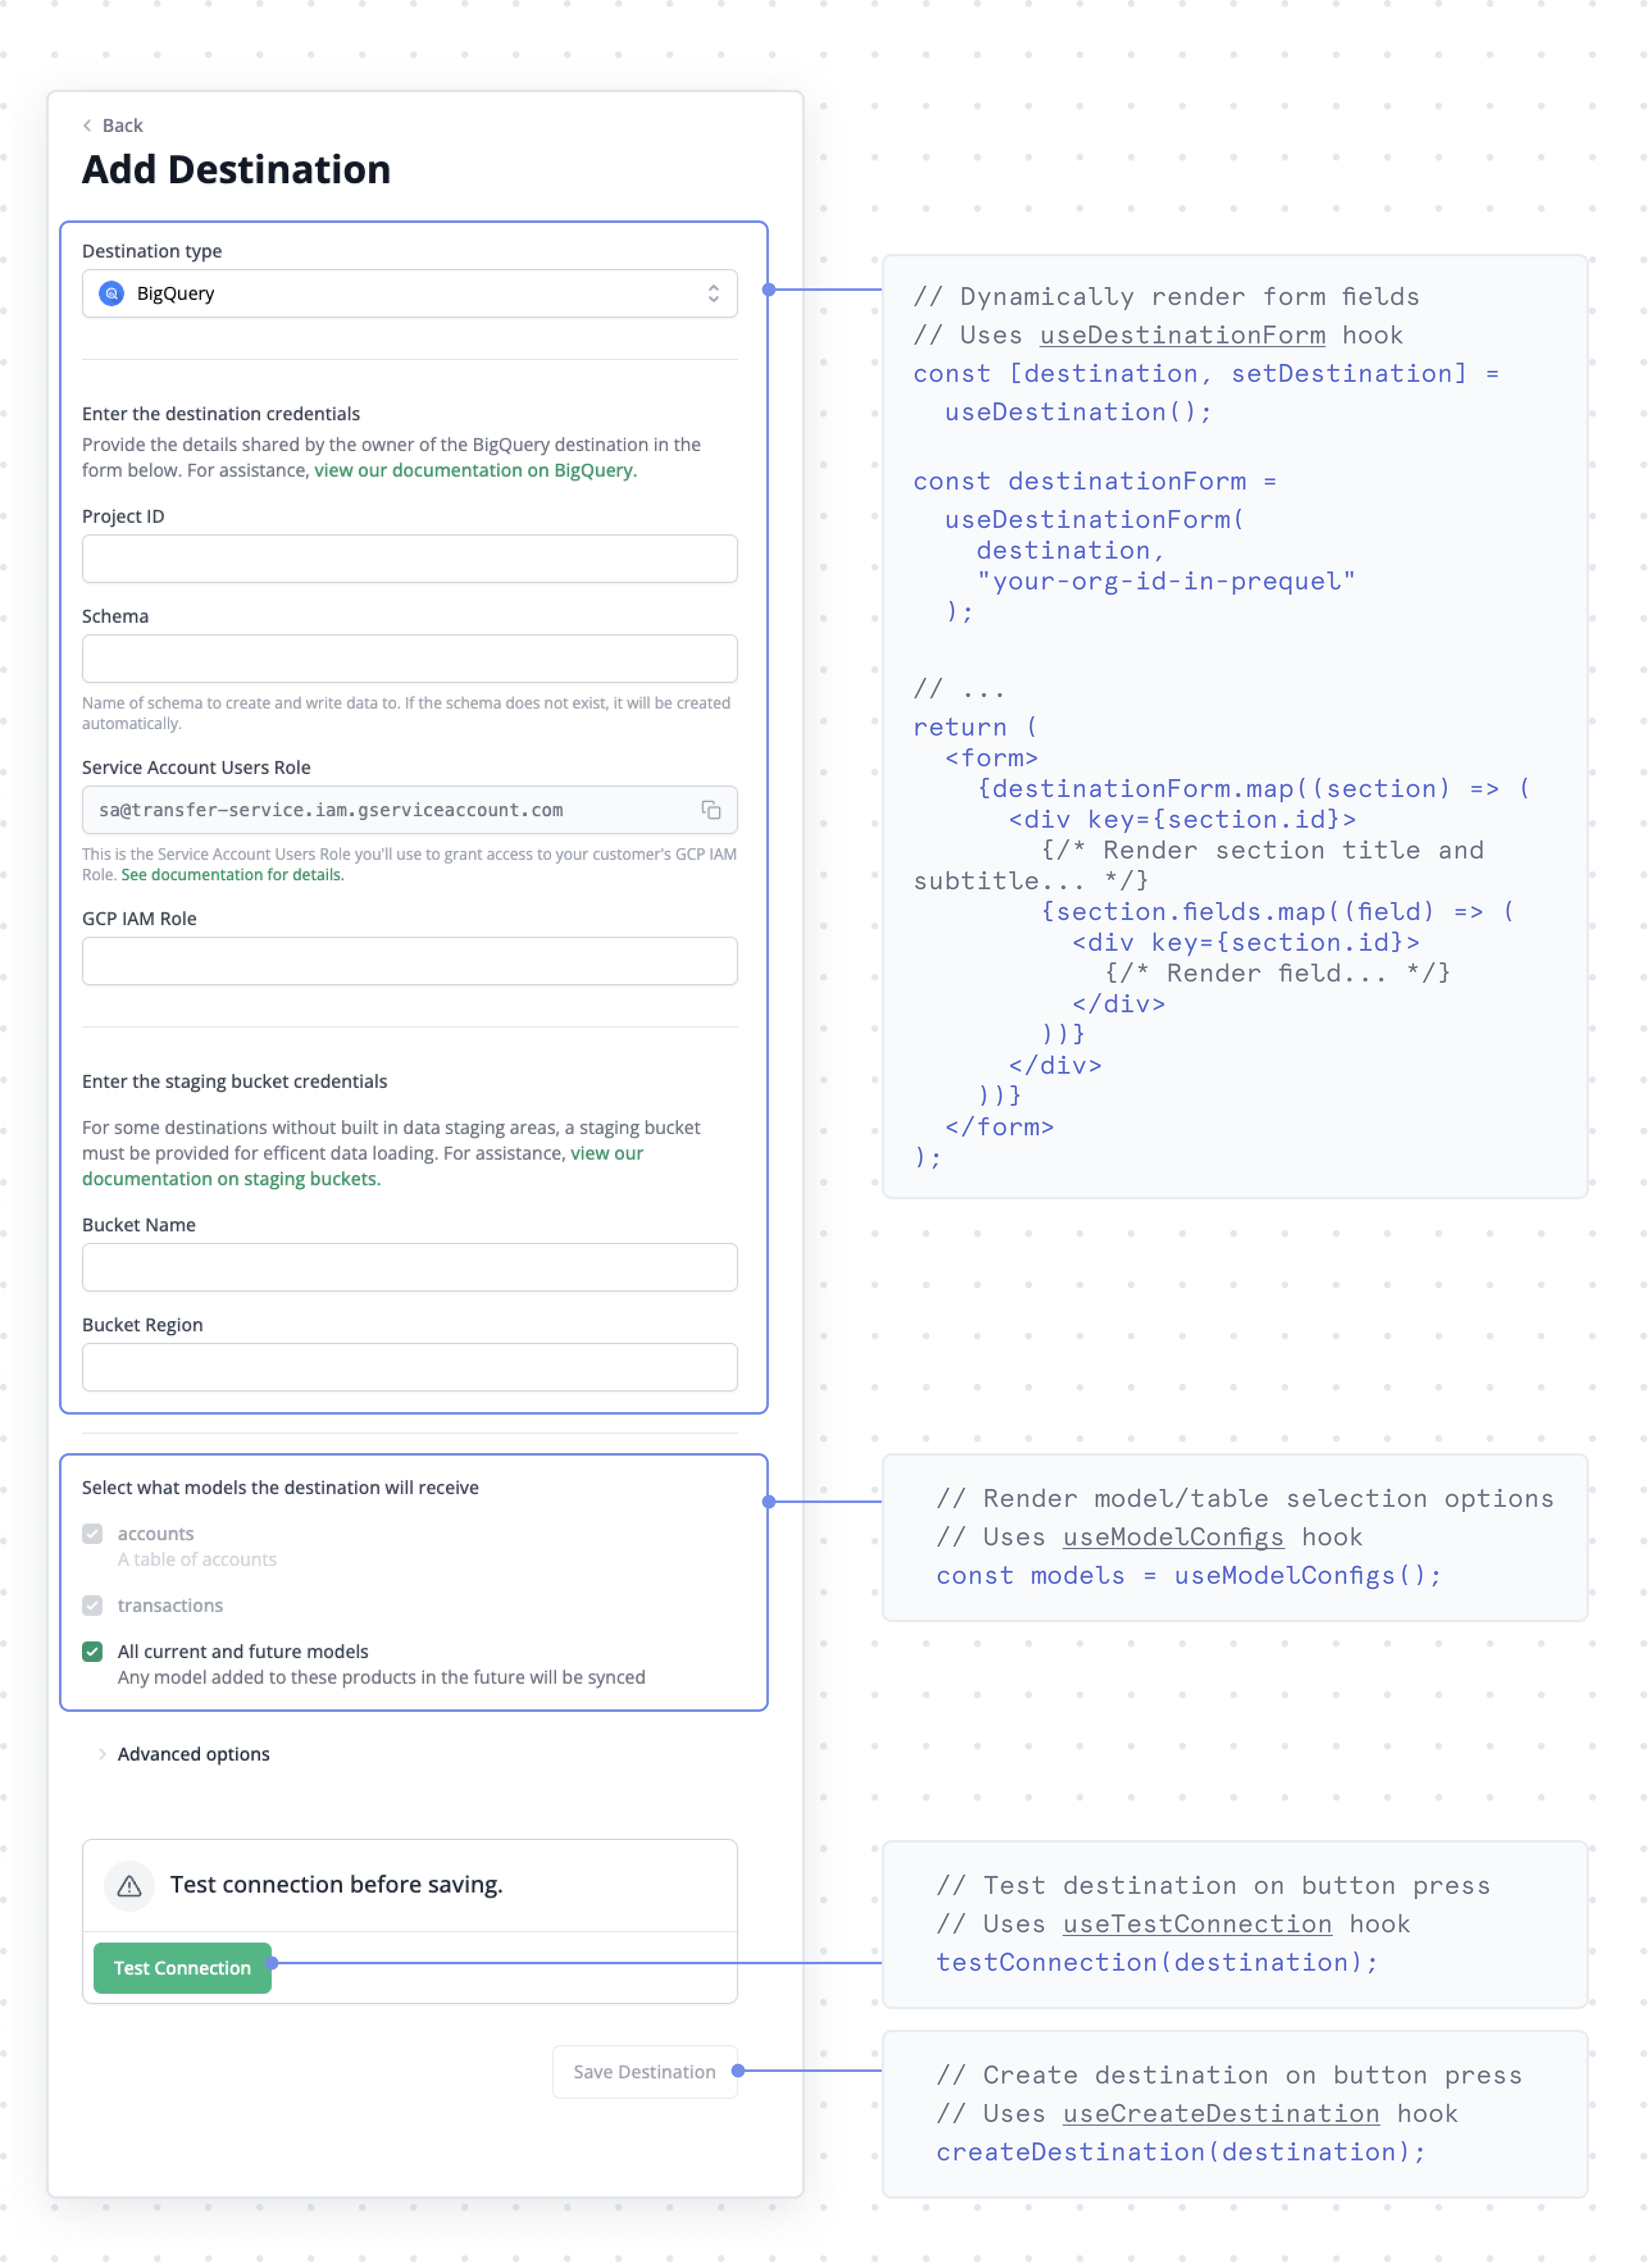 Sample "Add Destination" form powered by Prequel's React SDK.